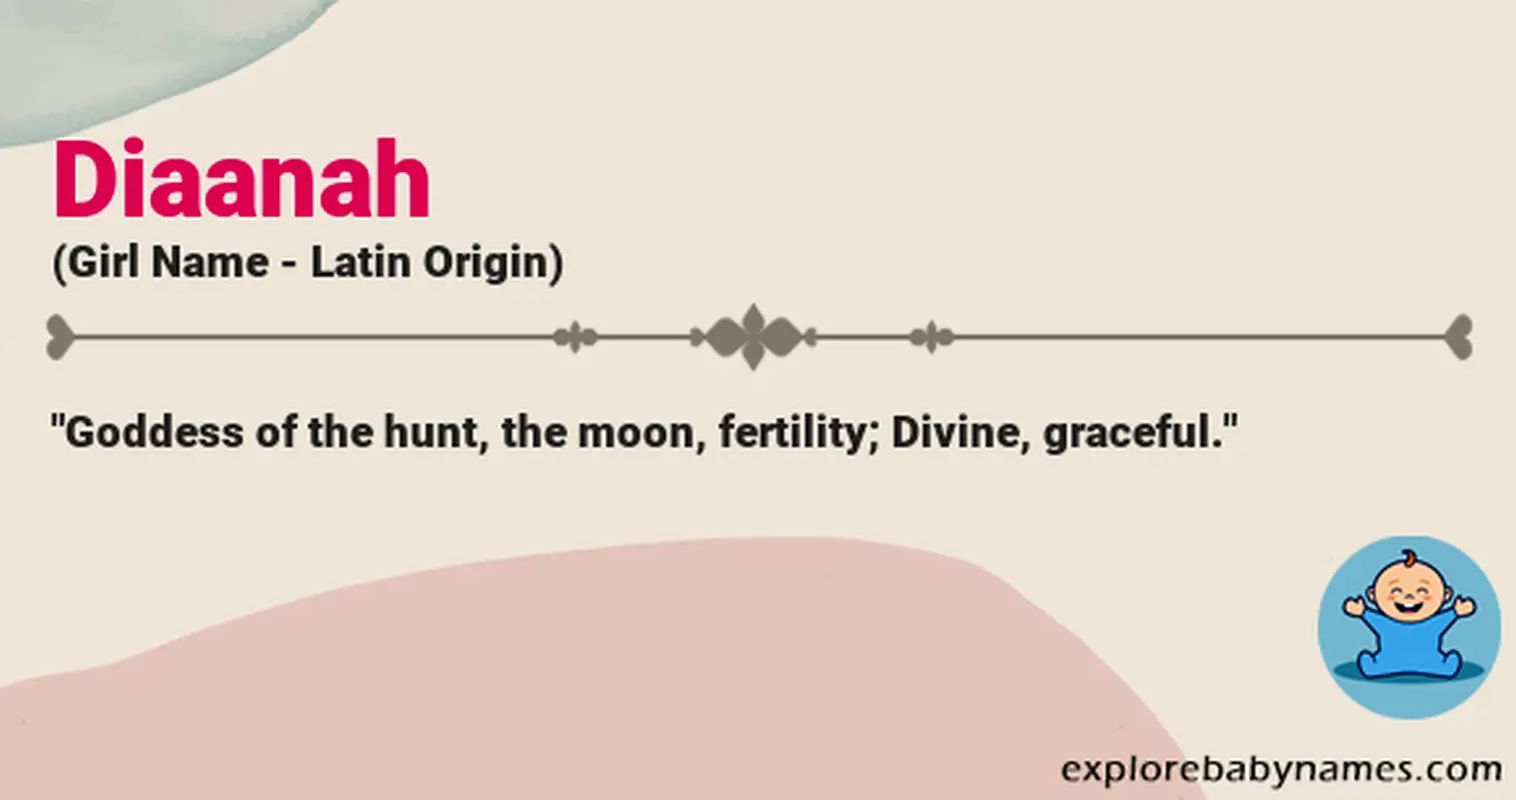 Meaning of Diaanah